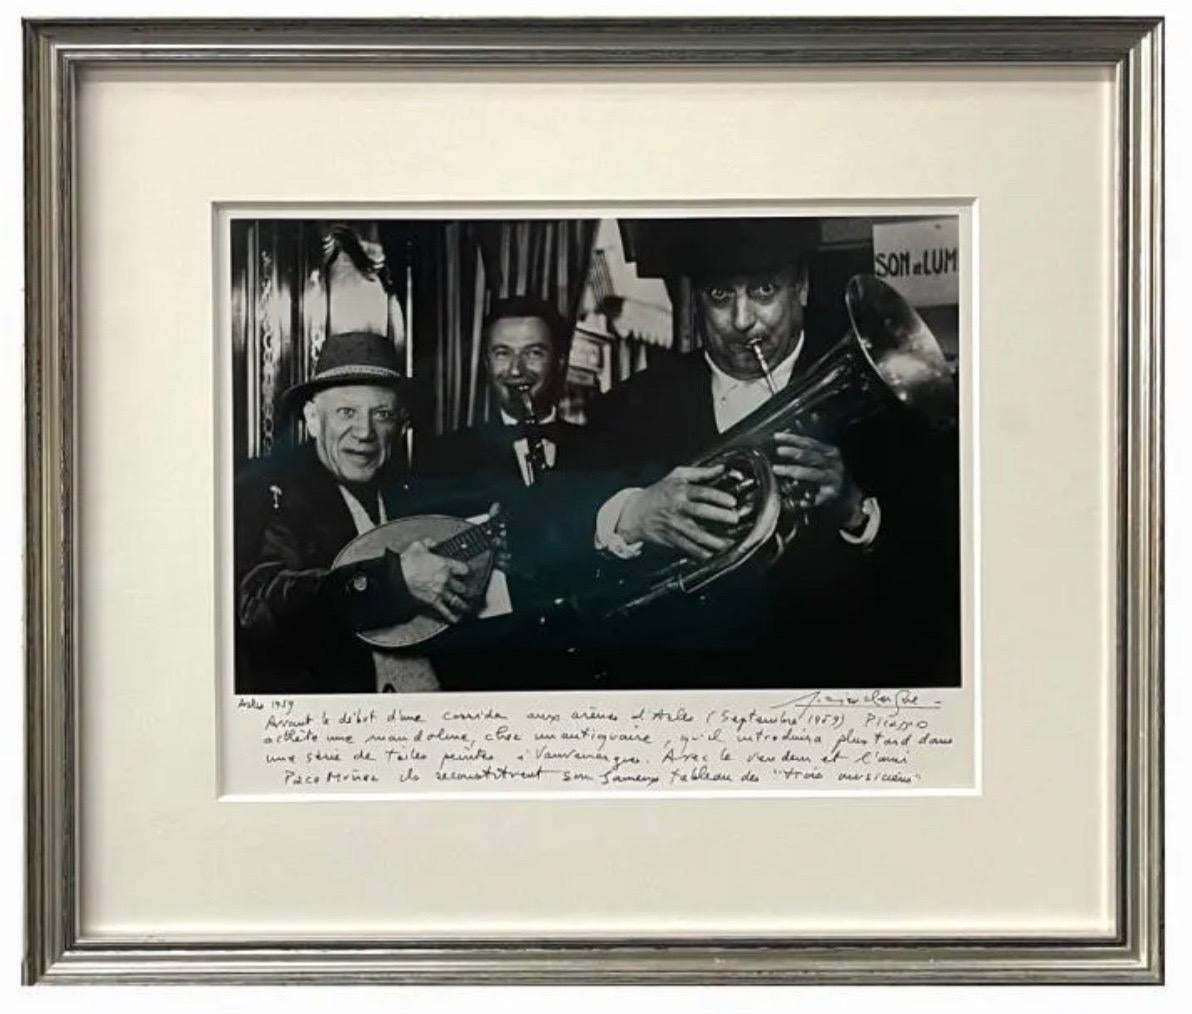 Lucien Clergue (FRENCH, 1934 - 2014) 
Gelatin silver photographic print depicting Pablo Picasso, Arles, 1959.
Picasso, l'antiquaire et Paco Munoz (les trois musiciens), Arles
A jazz or gypsy trio.
Hand signed by the artist with hand written